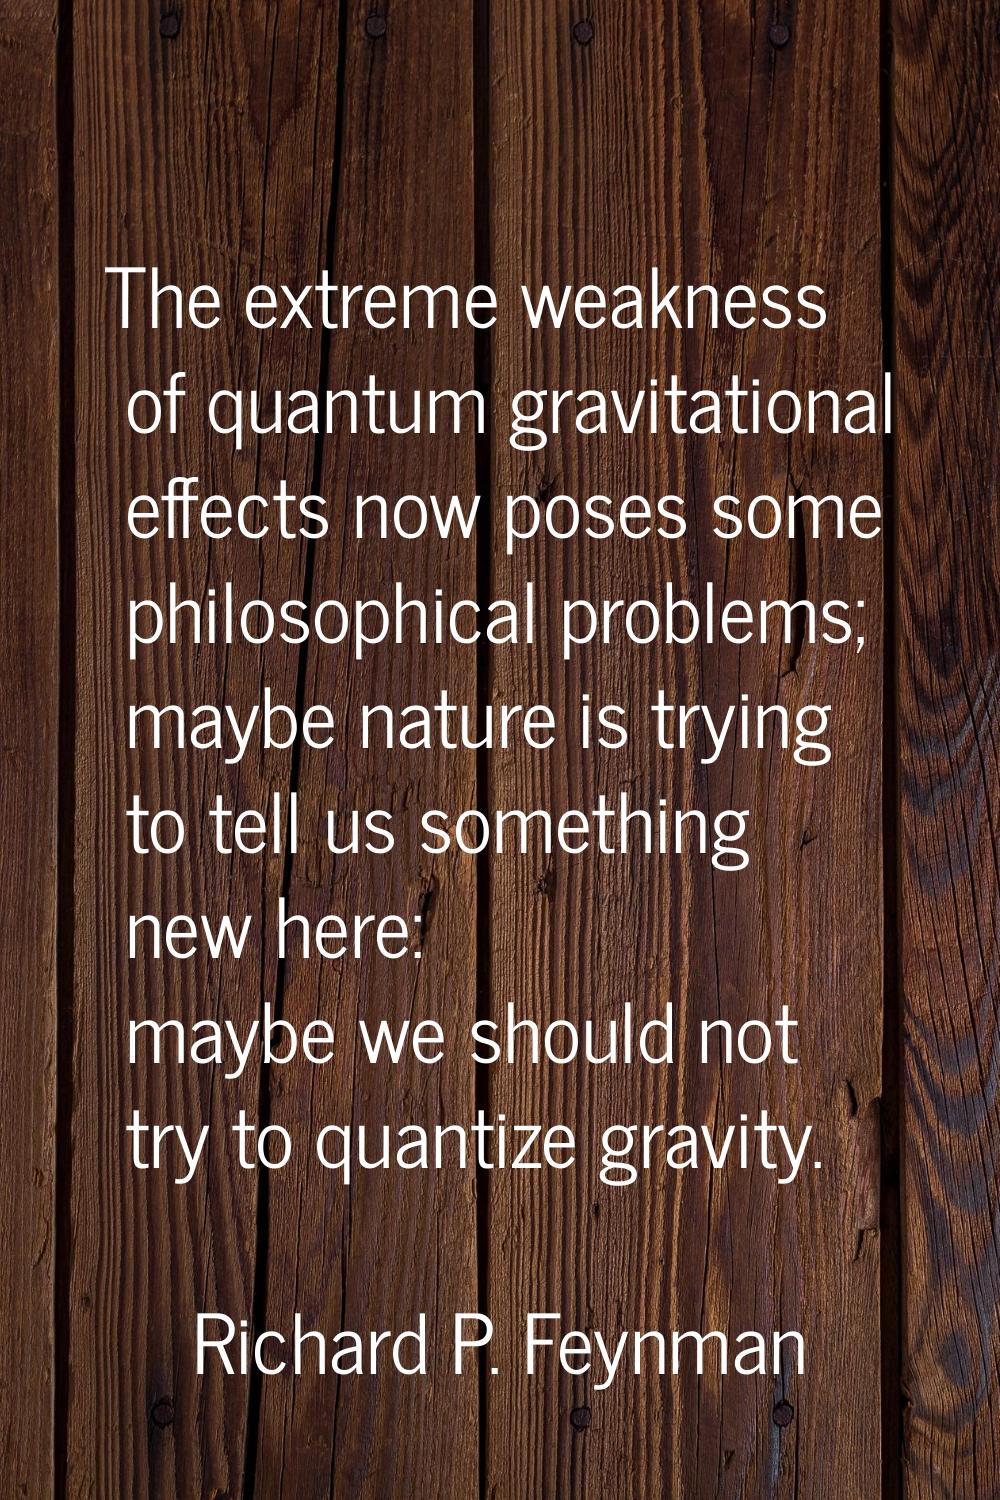 The extreme weakness of quantum gravitational effects now poses some philosophical problems; maybe 